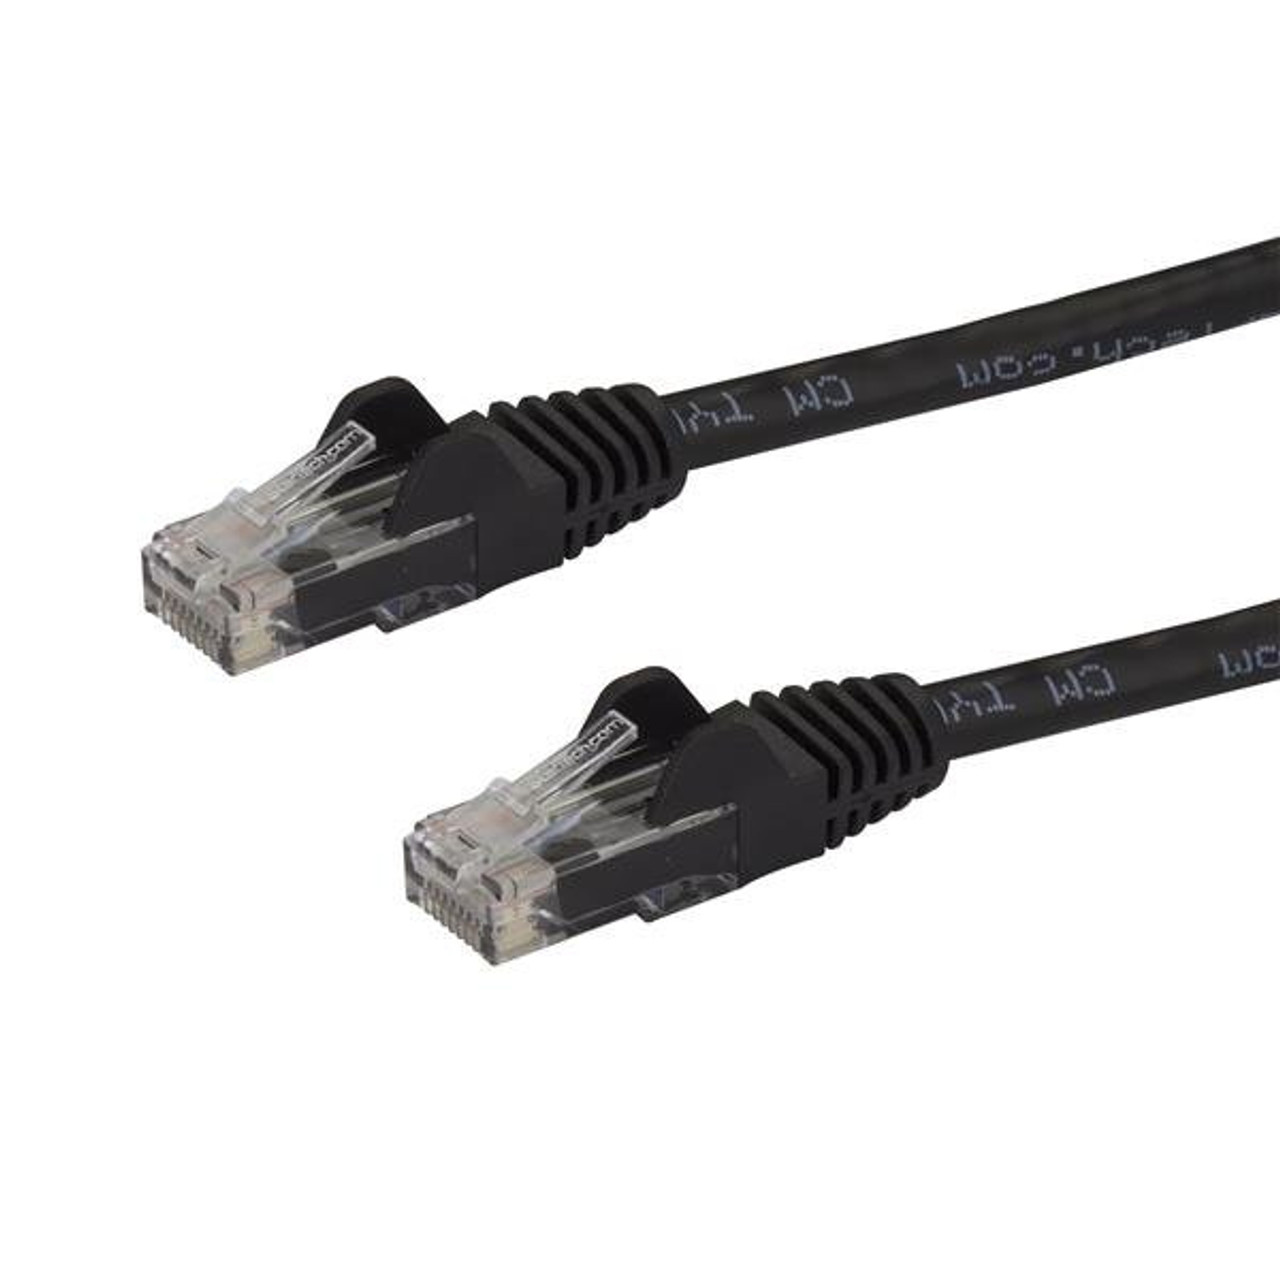 StarTech.com 5m CAT6 Ethernet Cable - Black CAT 6 Gigabit Ethernet Wire -650MHz 100W PoE RJ45 UTP Network/Patch Cord Snagless w/Strain Relief Fluke Tested/Wiring is UL Certified/TIA